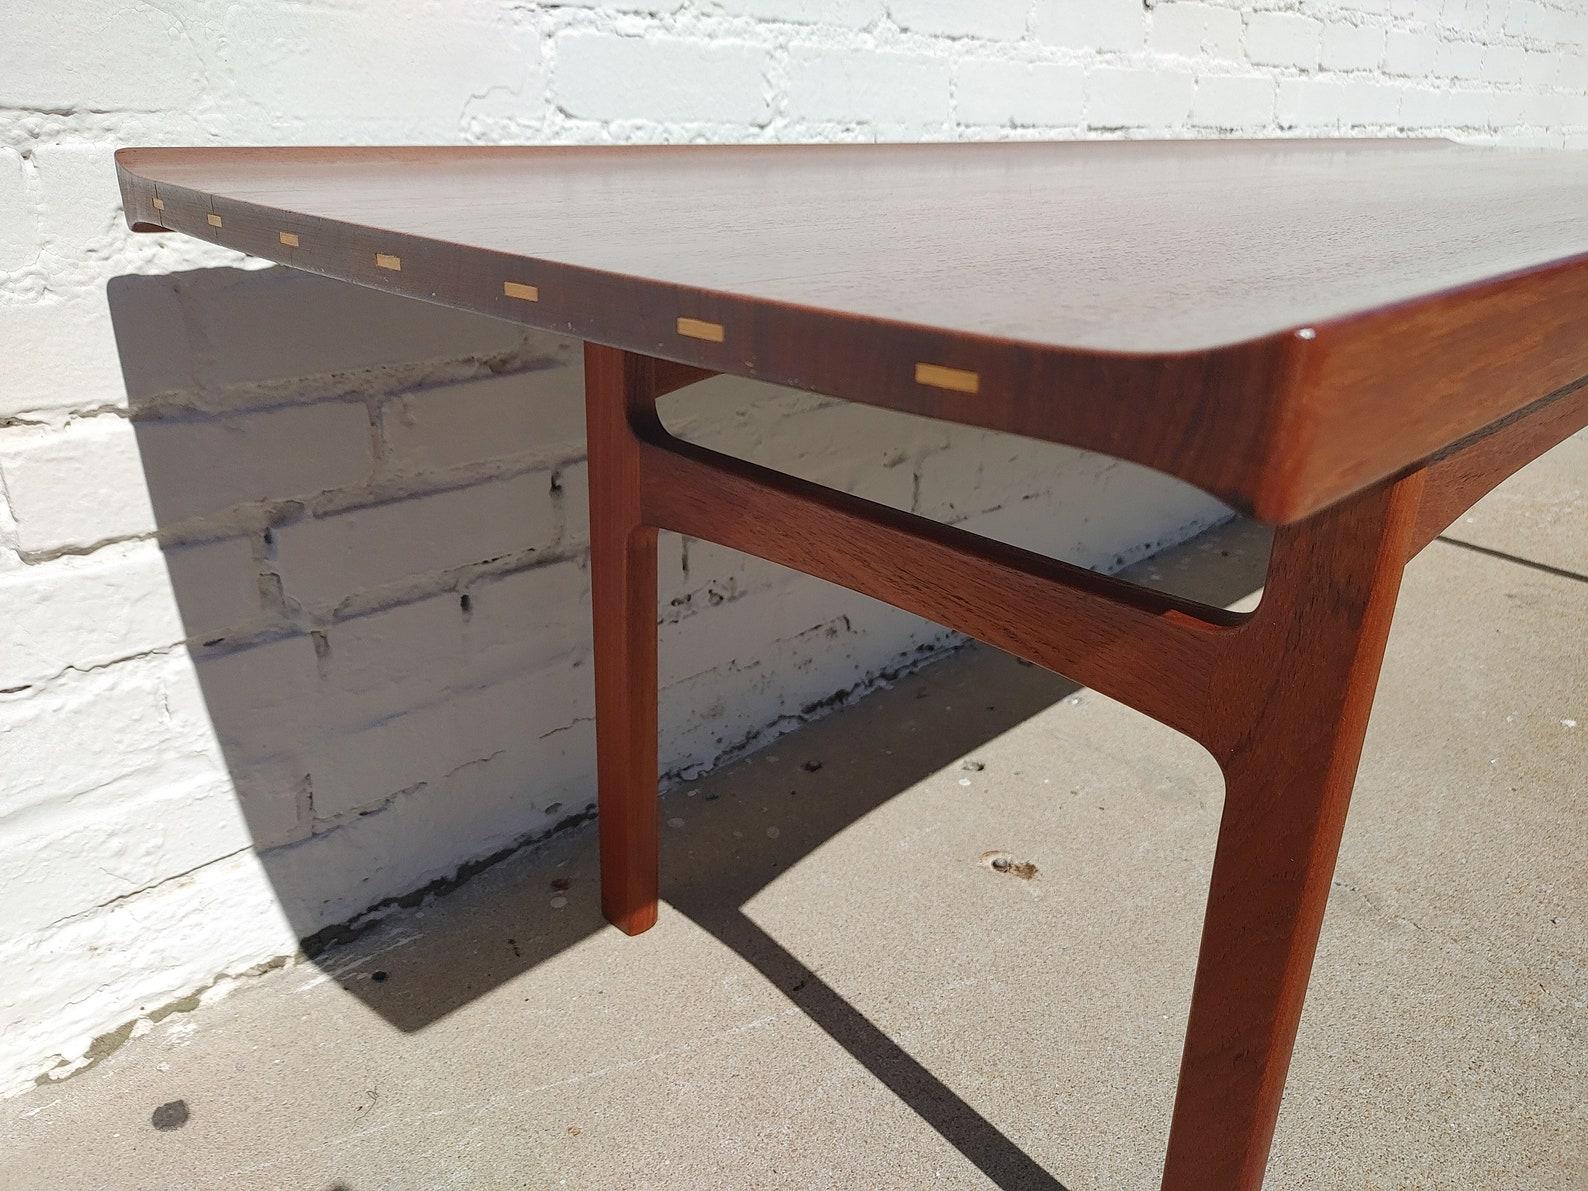 Mid Century Danish Modern Solid Teak Coffee Table by Seffle

Above average vintage condition and structurally sound. Has some expected slight finish wear and scratching. Outdoor listing pictures might appear slightly darker or more red than the item